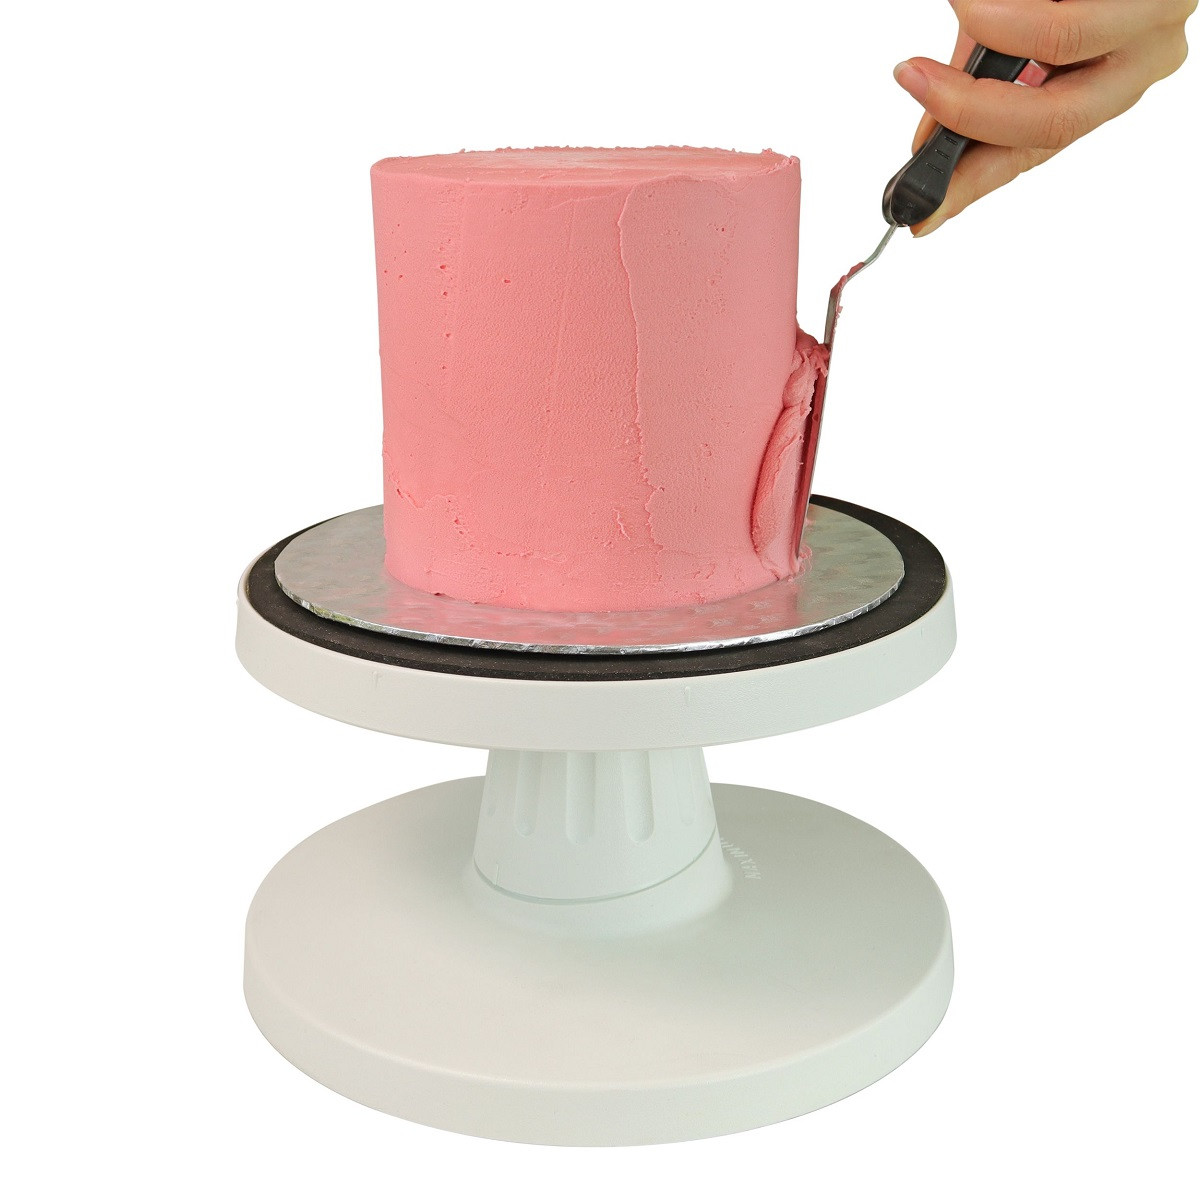 Cake plate PME Turnable 23x14cm